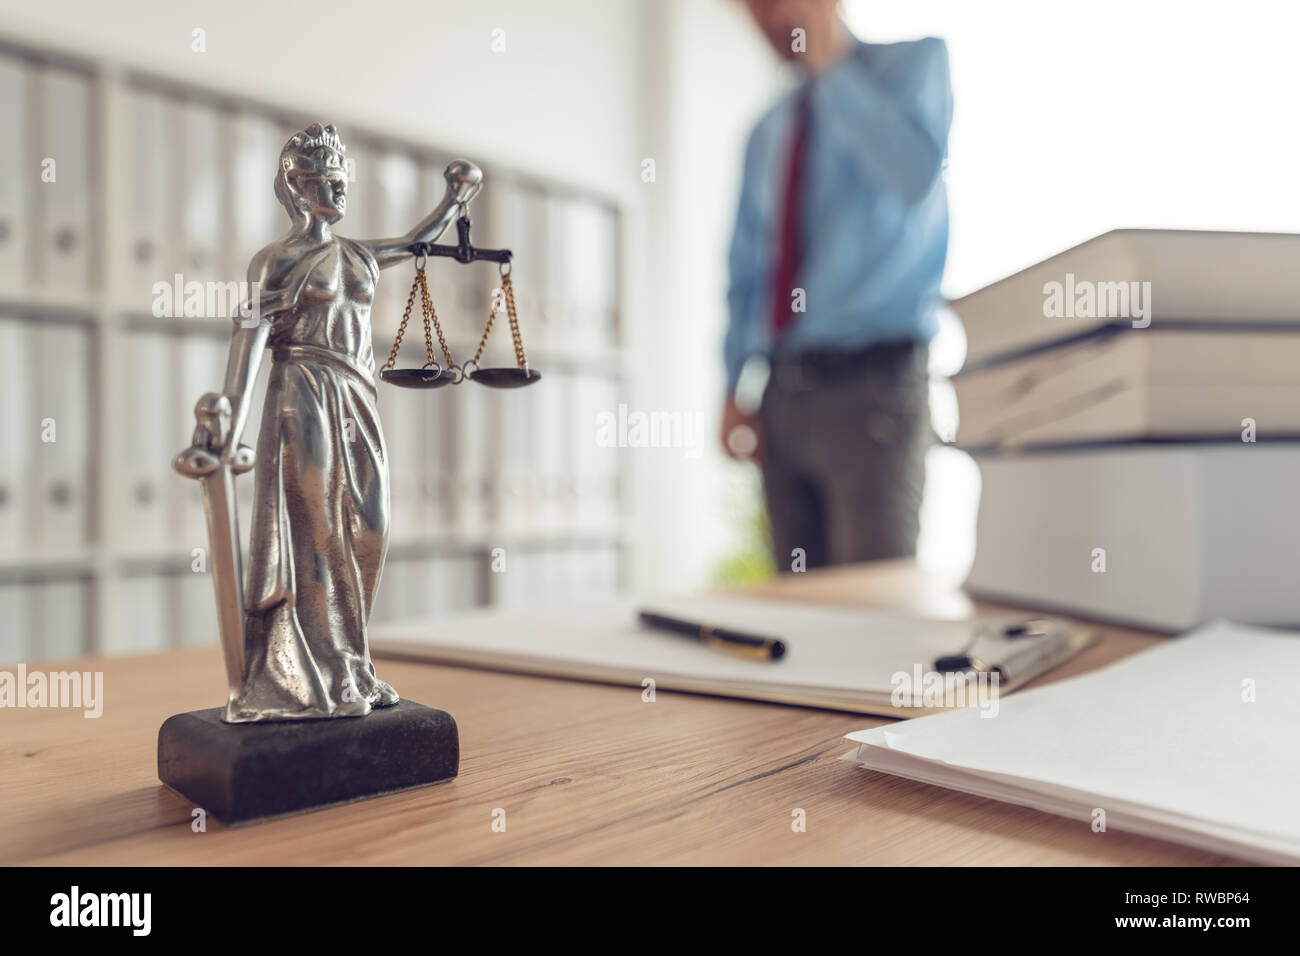 Attorney talking on mobile device in law office, selective focus on statue of Lady Justice Stock Photo